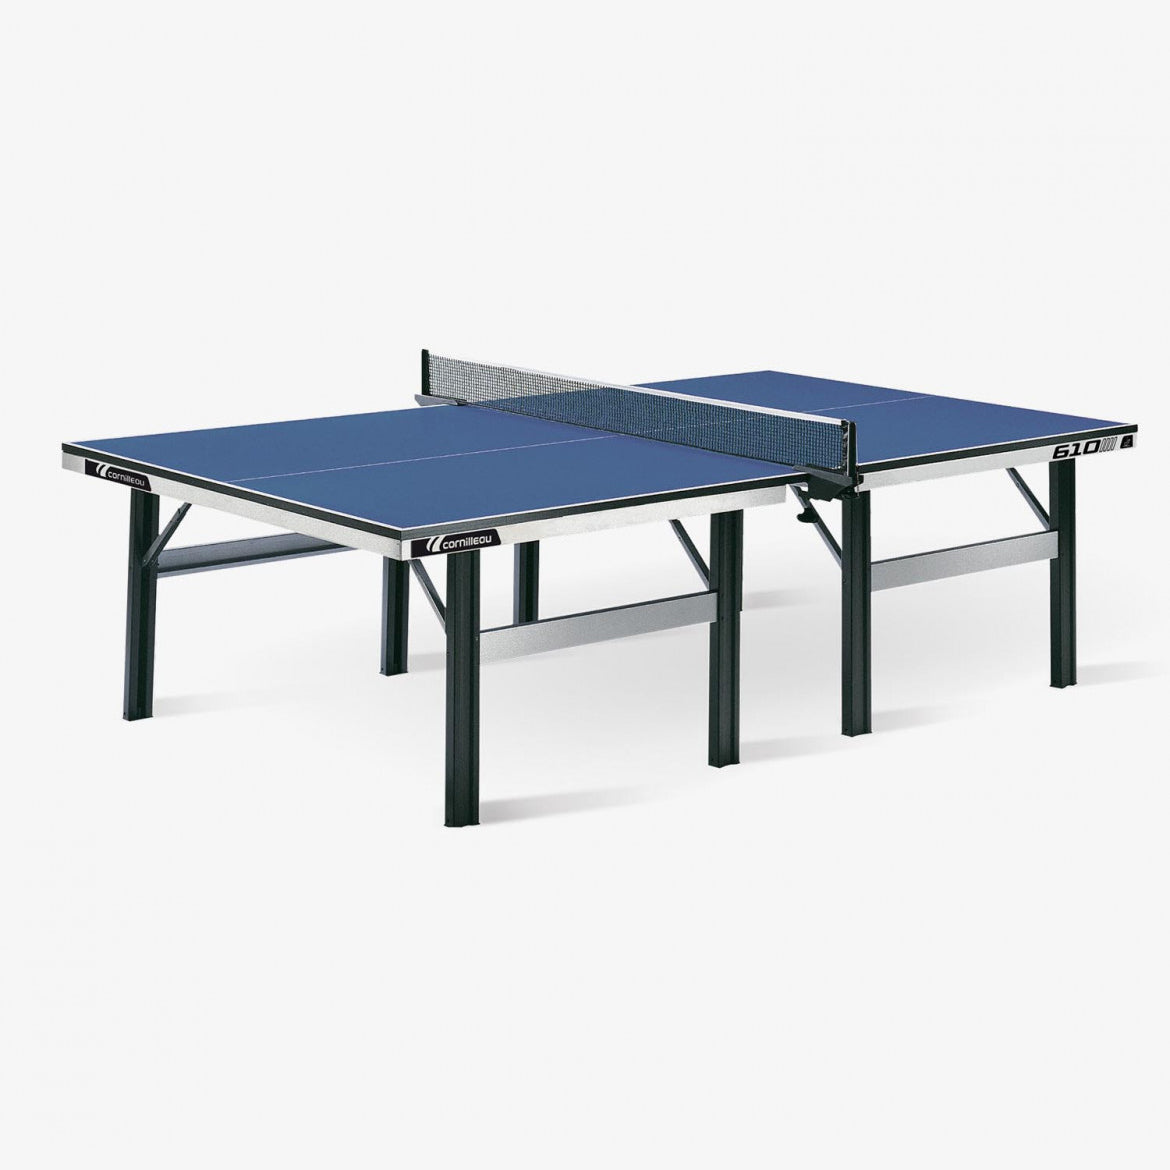 Cornilleau 610 Static Indoor Table Tennis Table